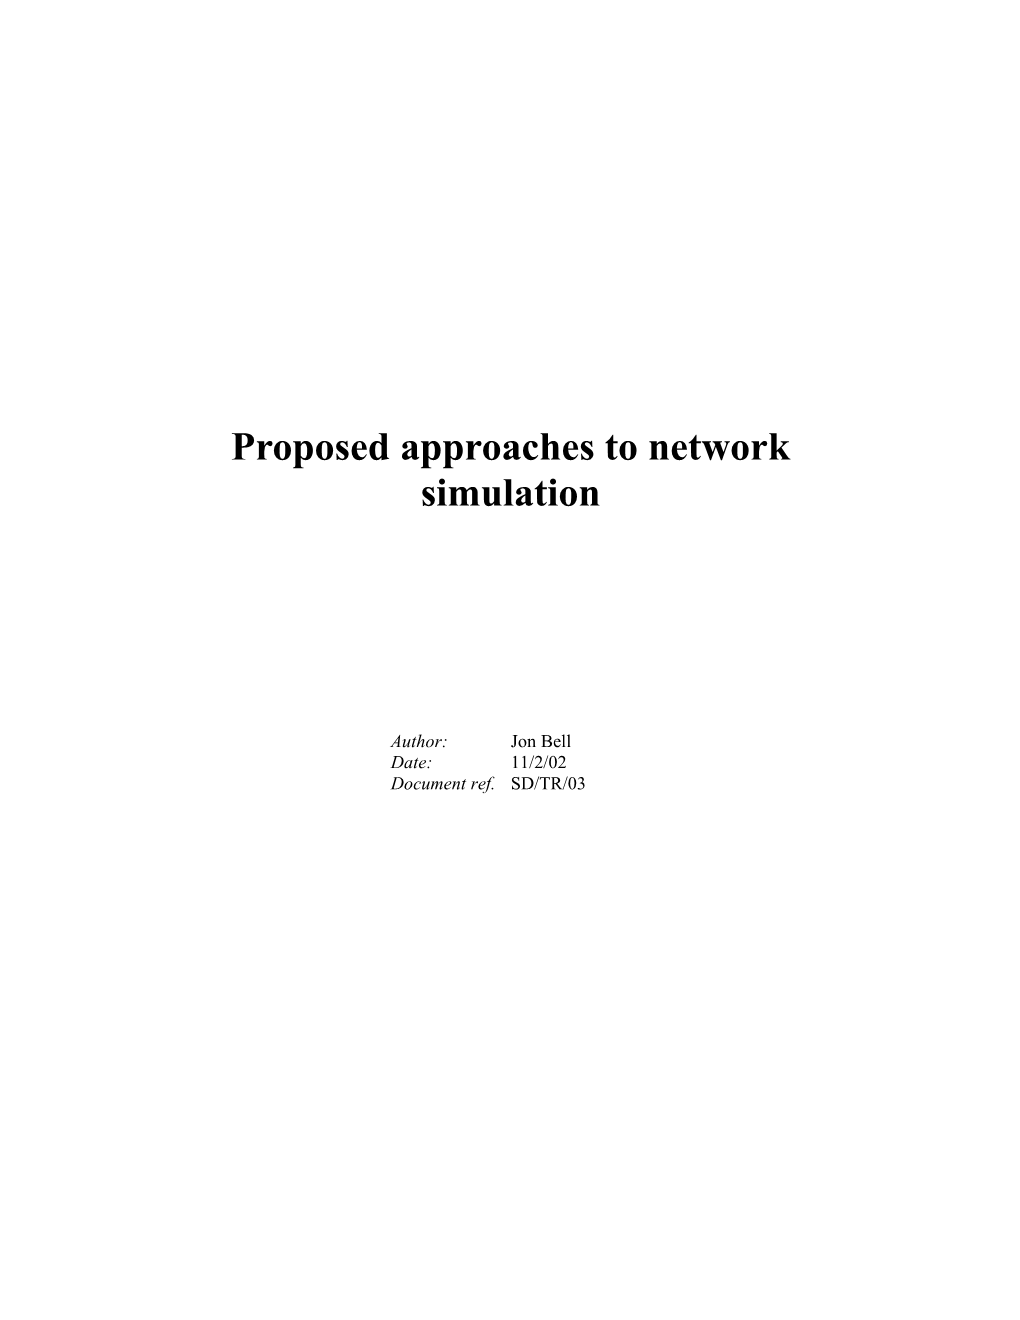 Proposed Approaches to Network Simulation